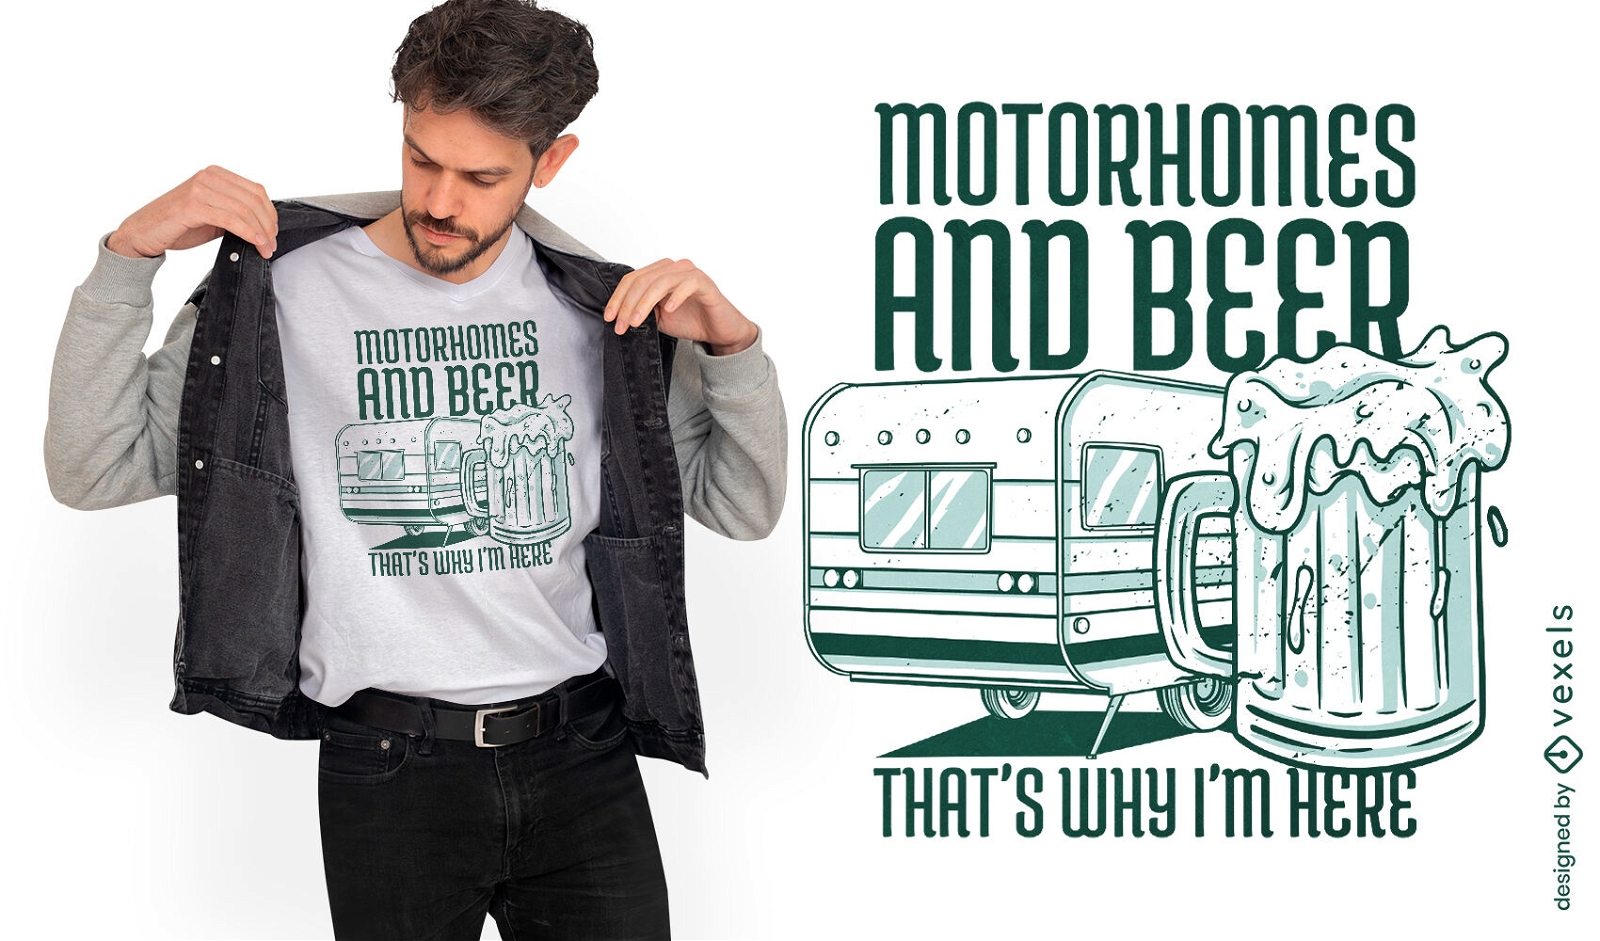 Motorhomes and beer quote t-shirt design